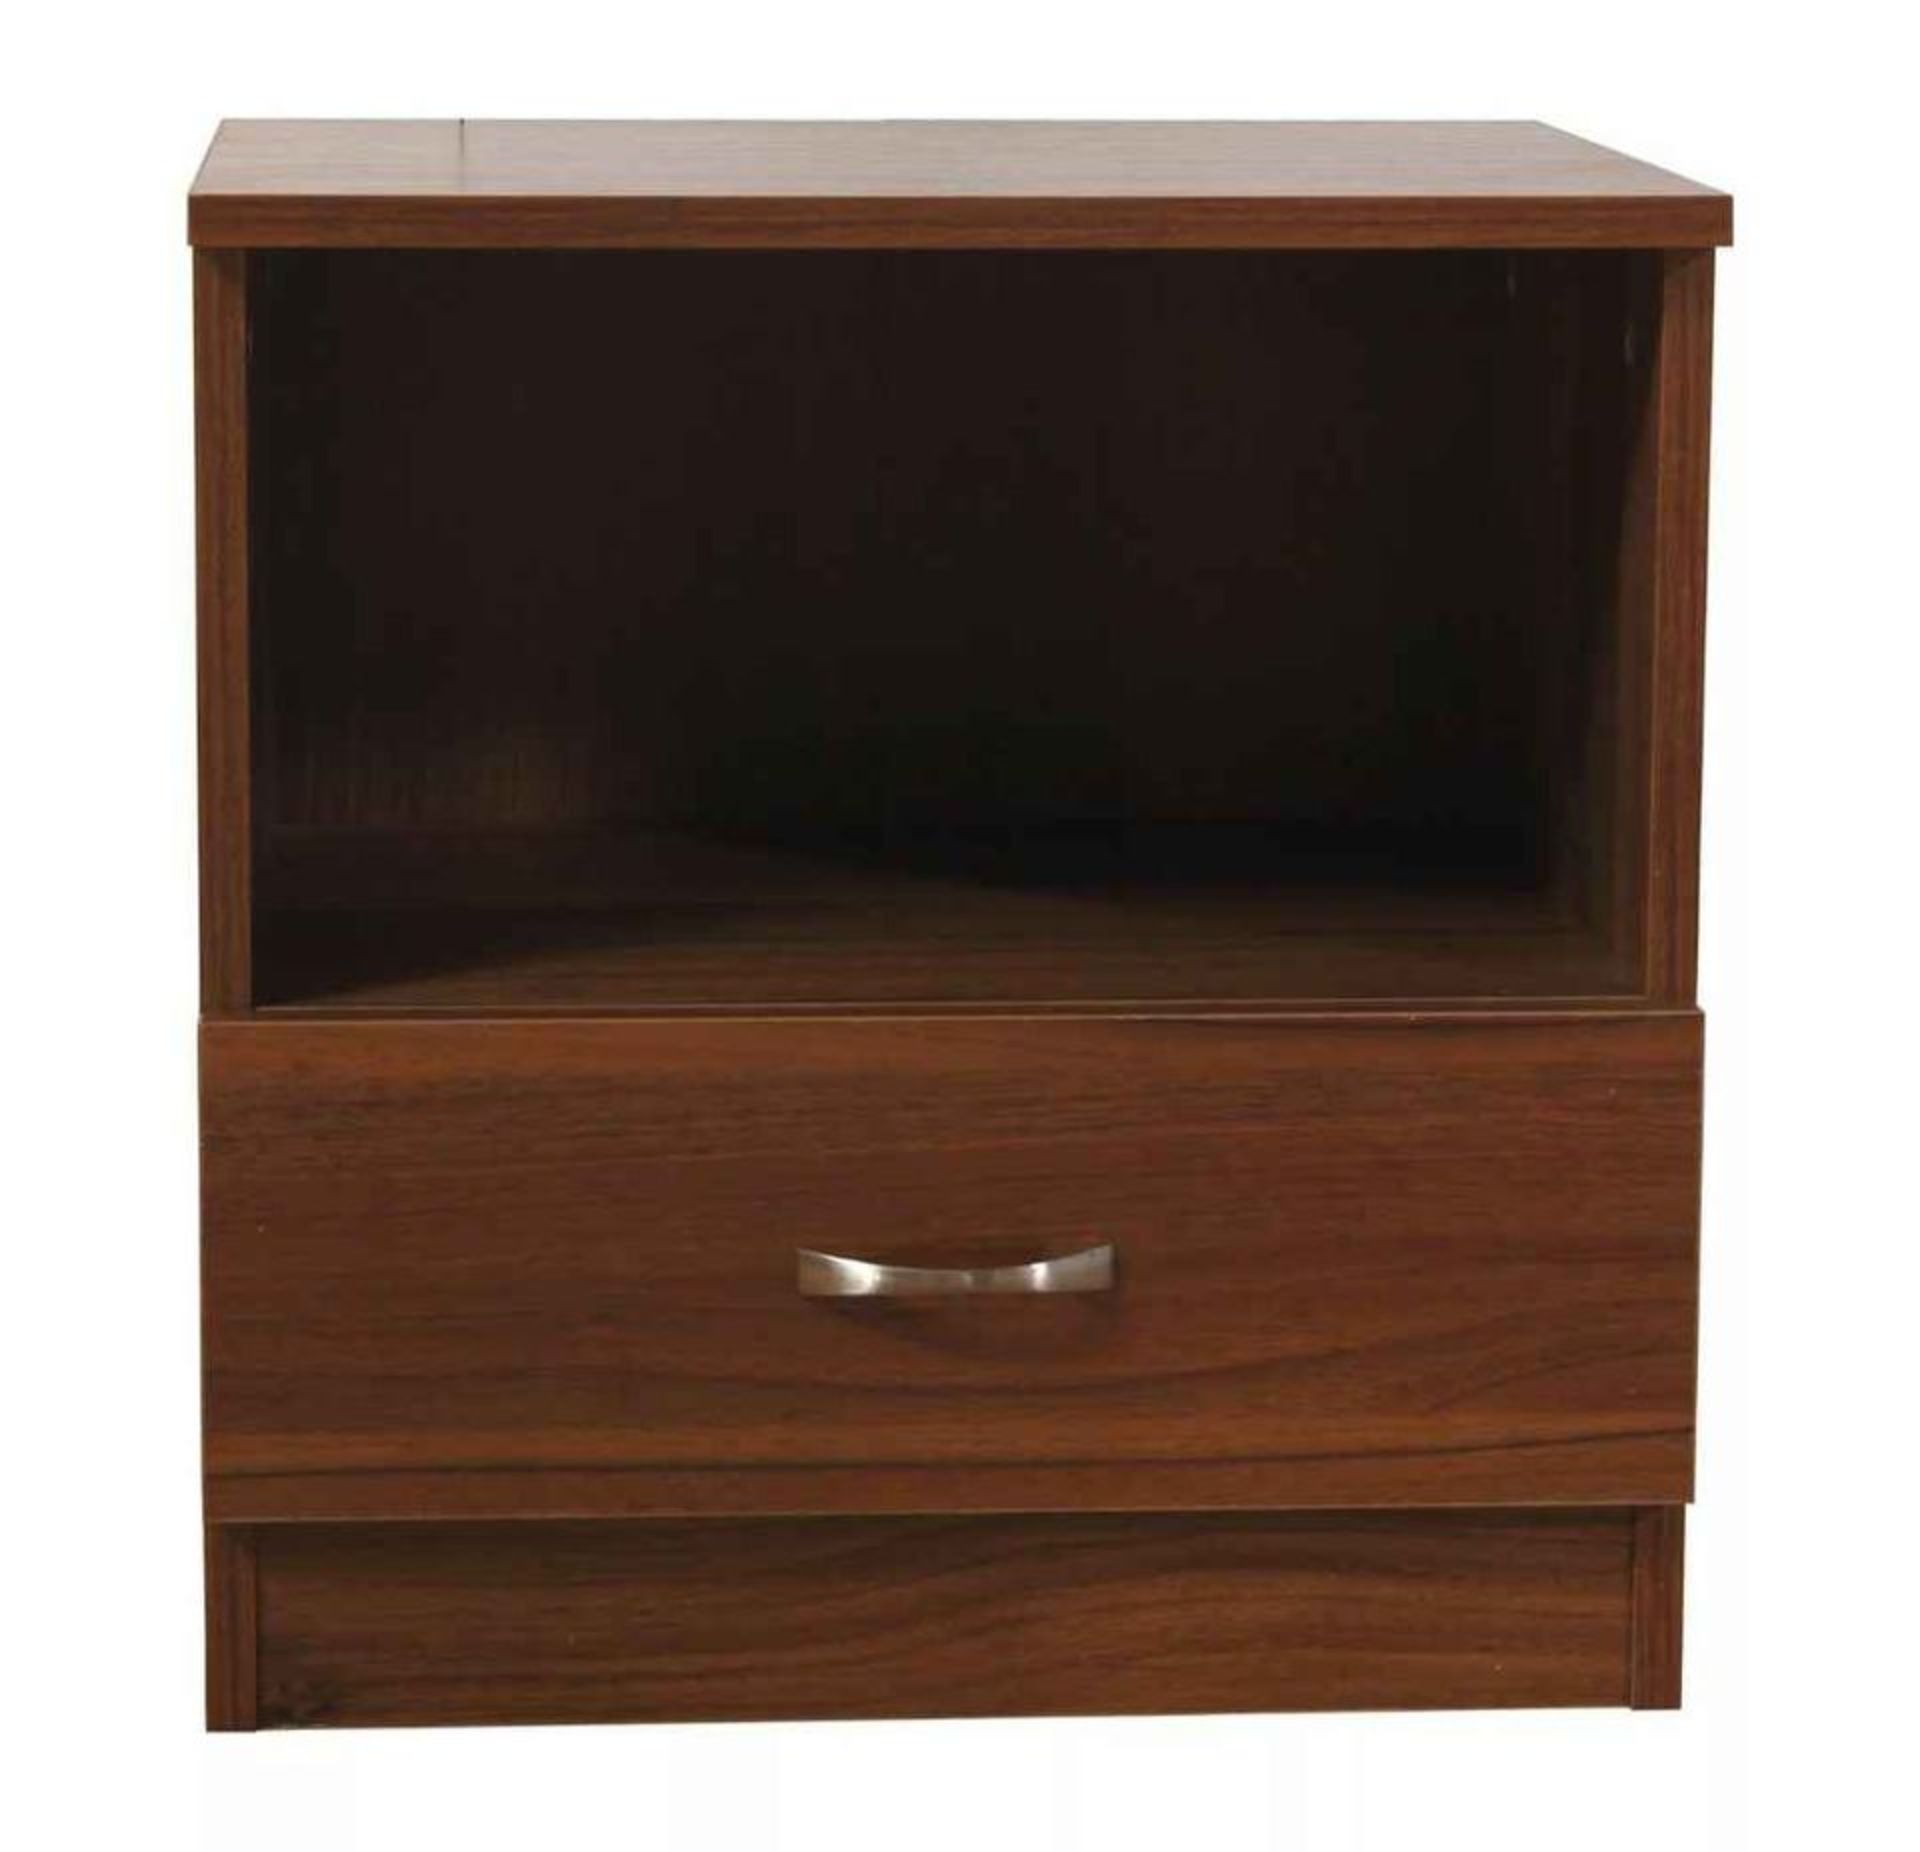 WALNUT BEDSIDE CABINET BRAND NEW BOXED